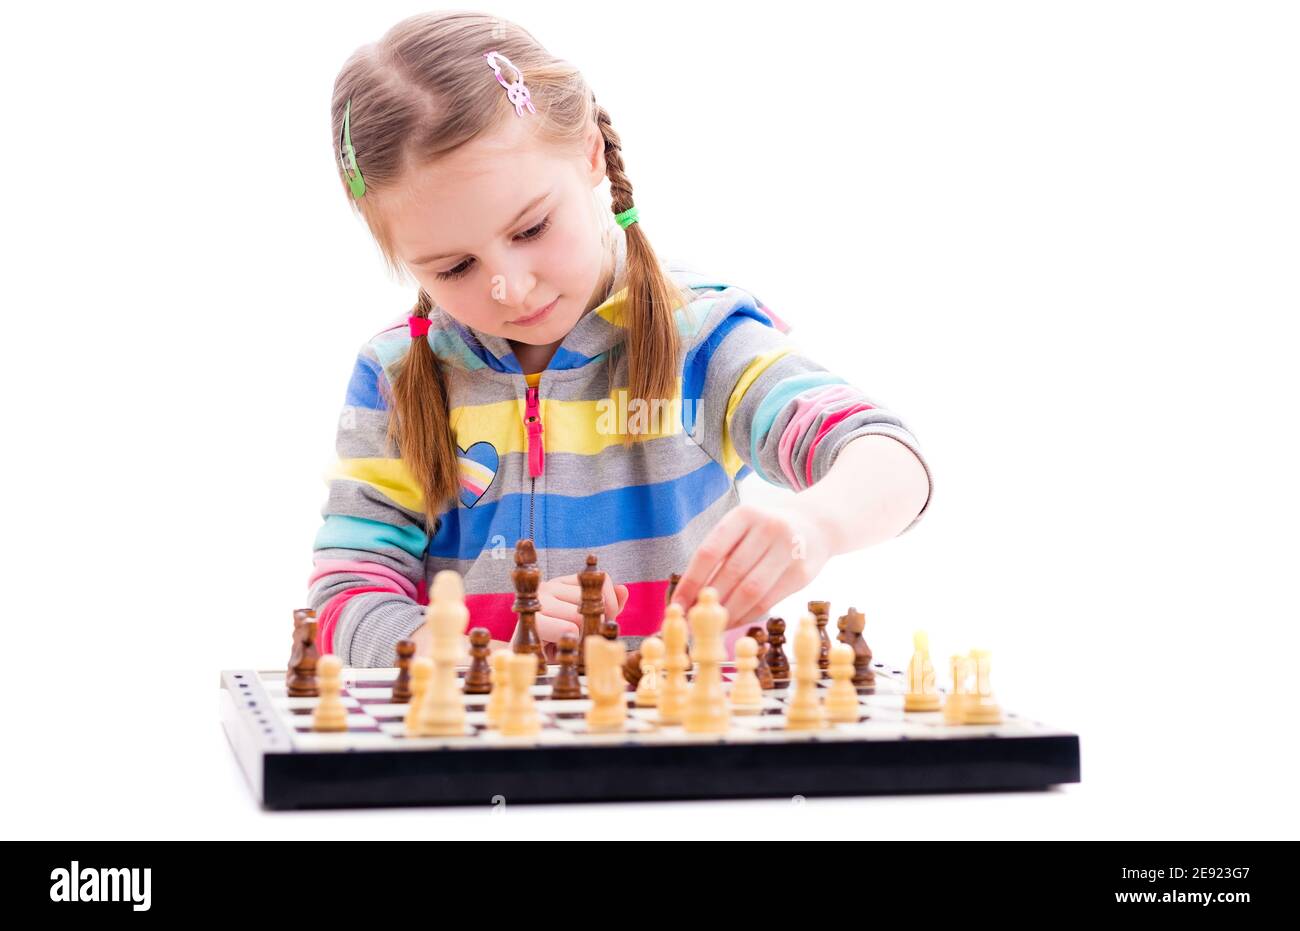 Premium Photo  Portrait of child during chess game boy plays chess and  thinks intently about the next move isolation on white background